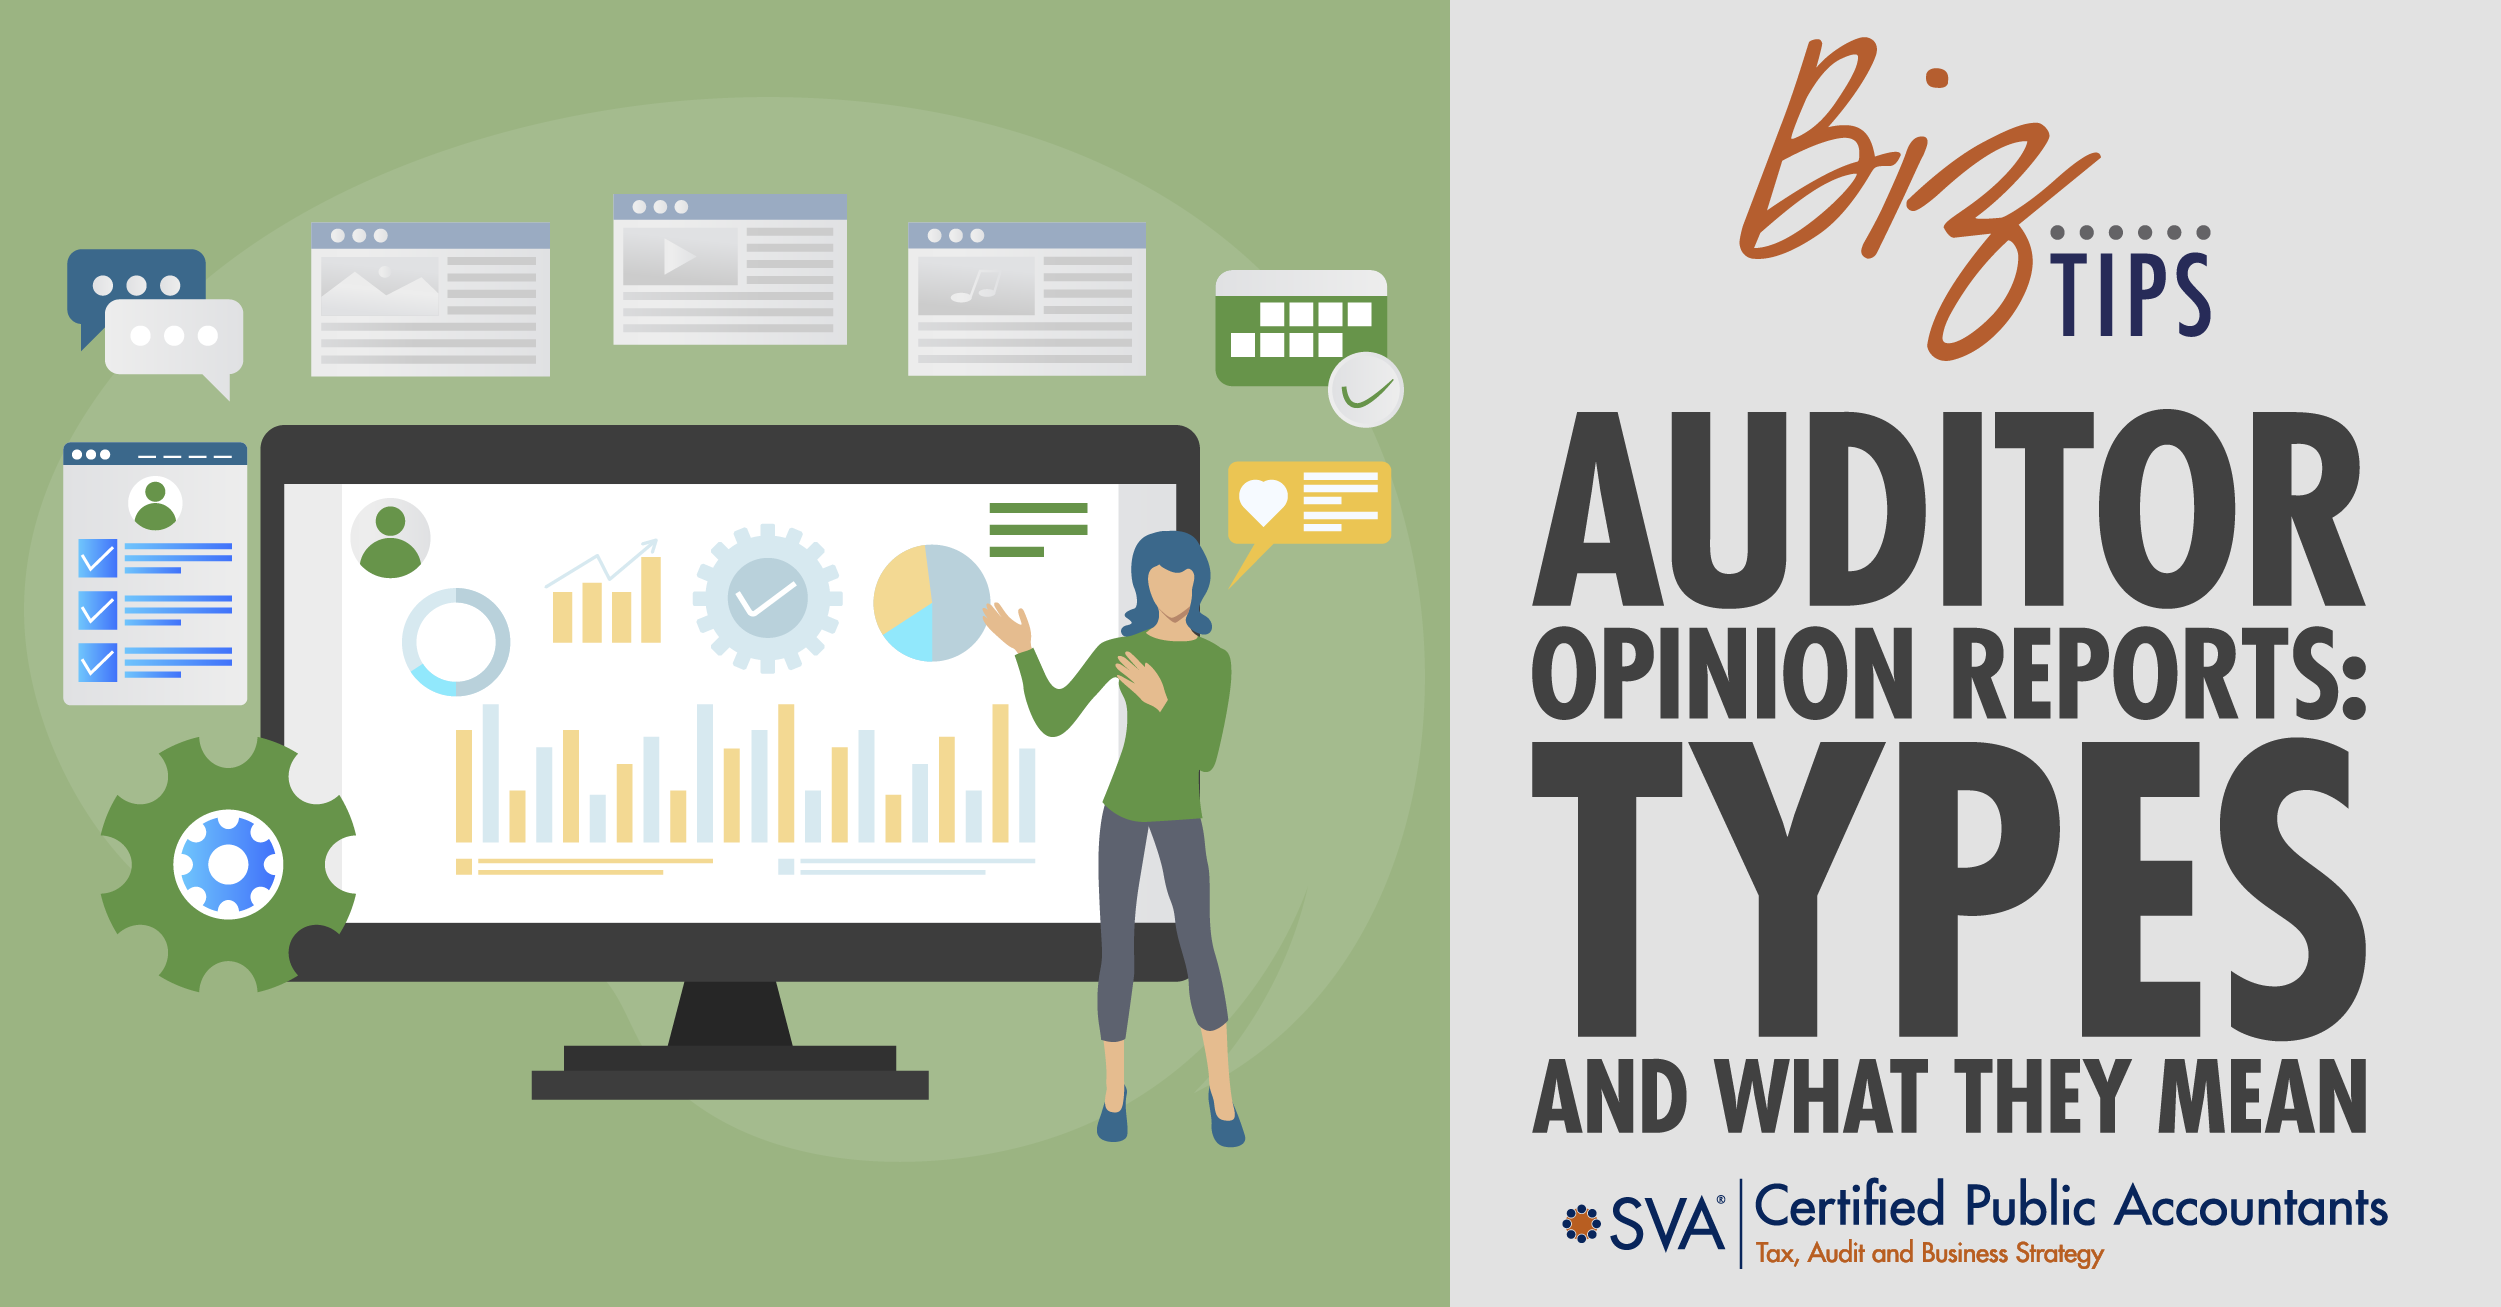 Auditor Opinion Reports: Types and What They Mean